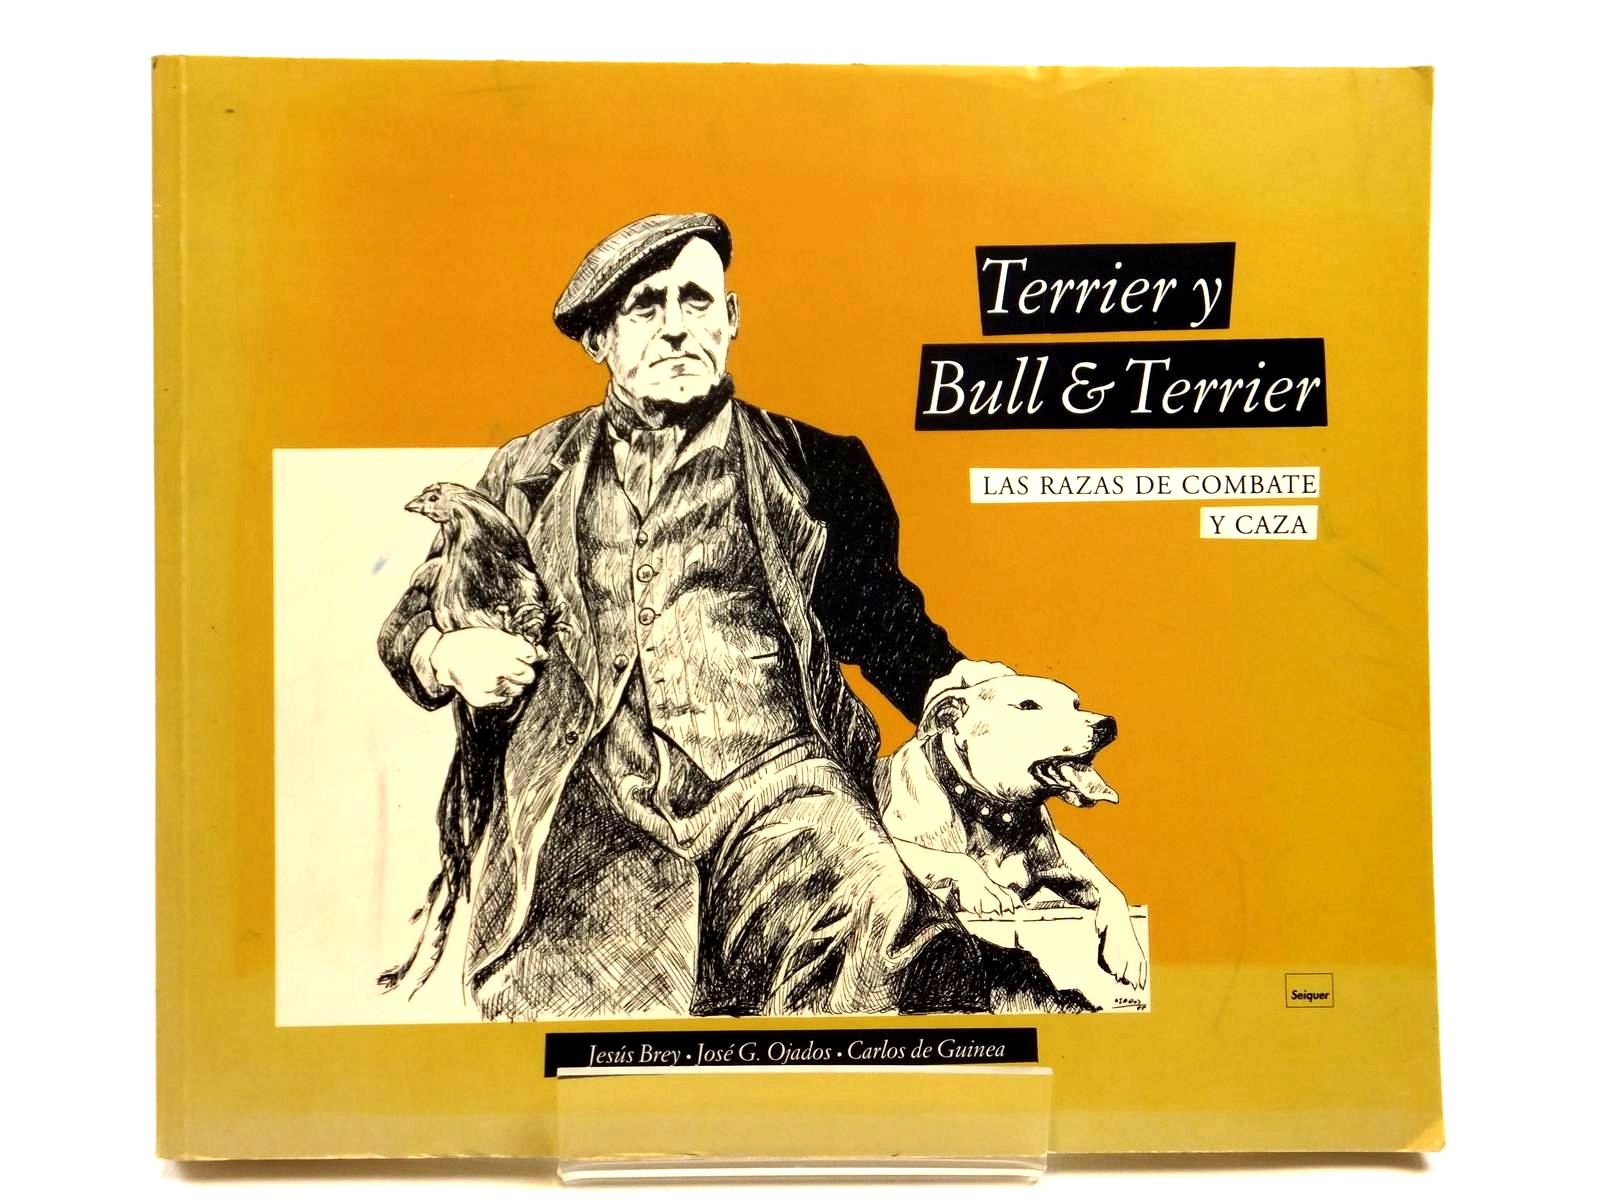 Photo of TERRIER Y BULL & TERRIER LAS RAZAS DE COMBATE Y CAZA written by Brey, Jesus
De Guinea, Carlos illustrated by Ojados, Jose G. published by Seiquer (STOCK CODE: 2121439)  for sale by Stella & Rose's Books